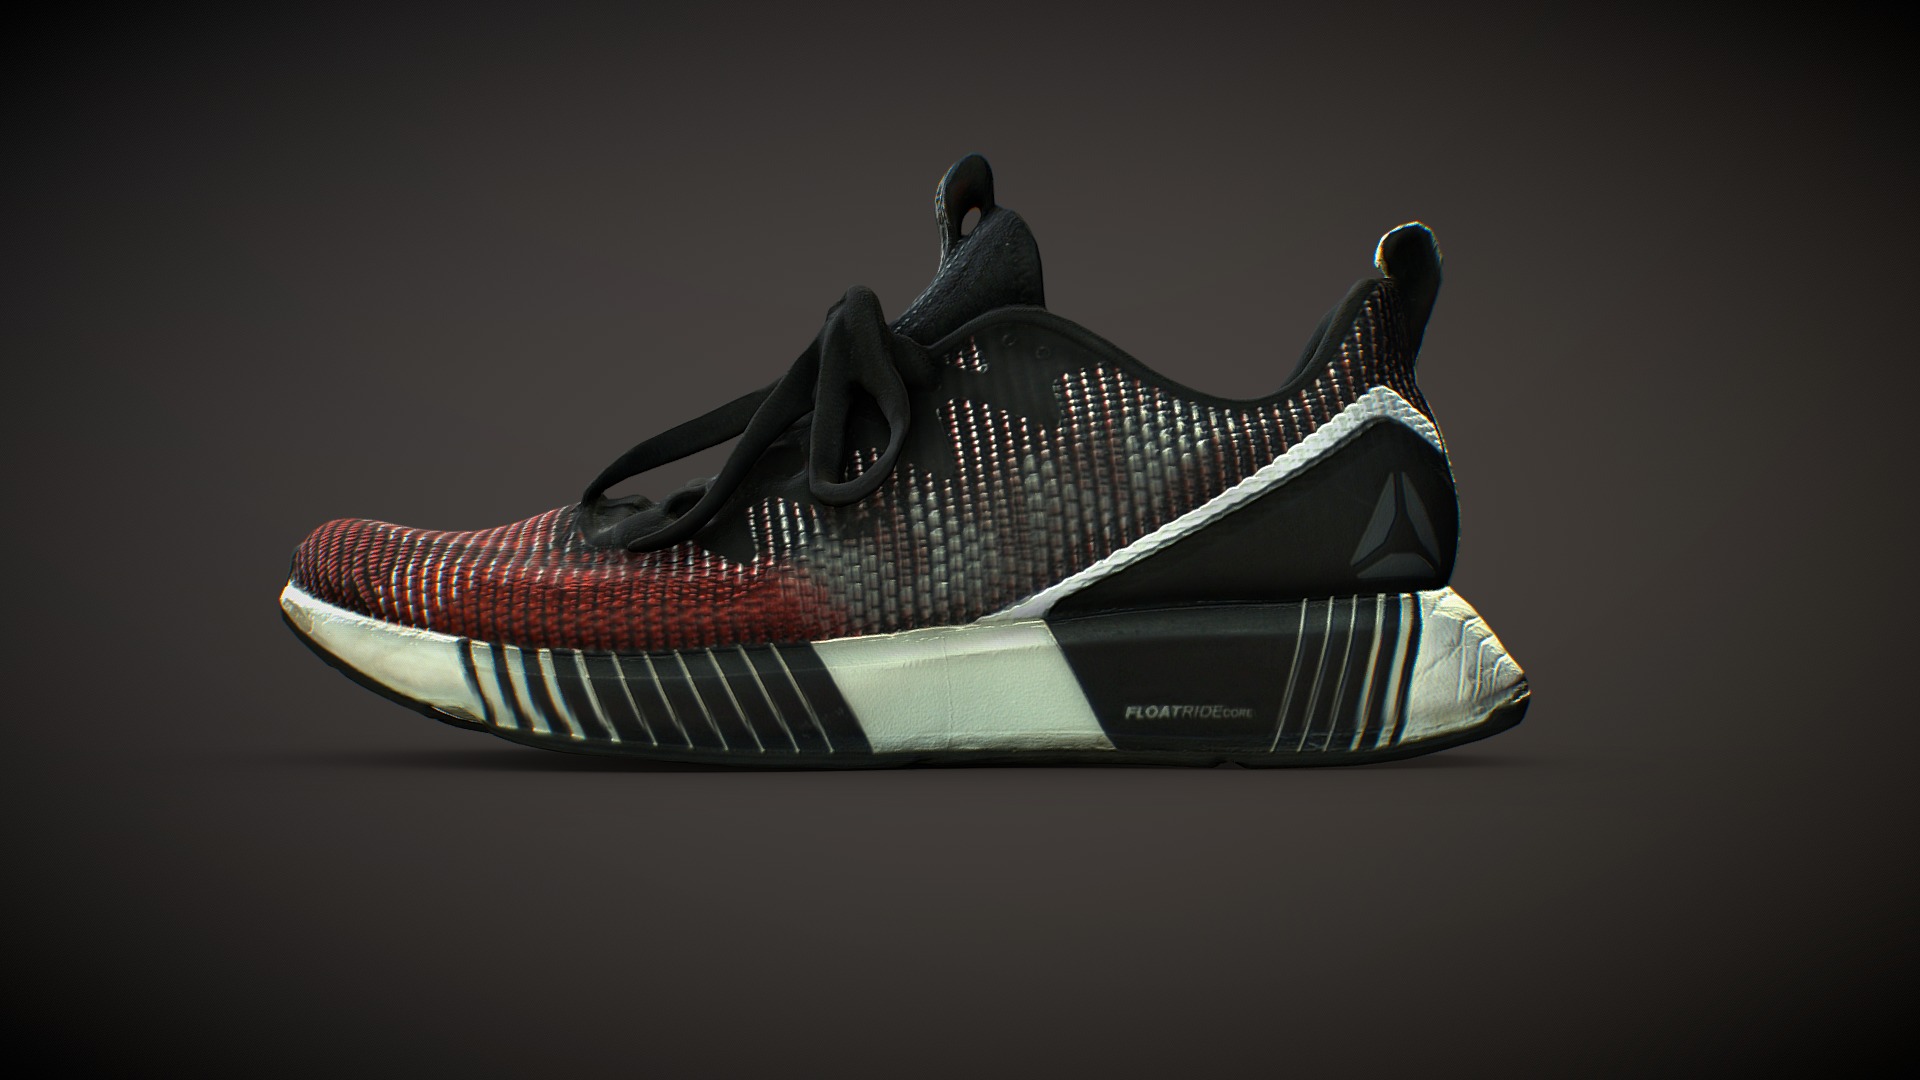 3D model Reebok 2 - This is a 3D model of the Reebok 2. The 3D model is about a black and red shoe.